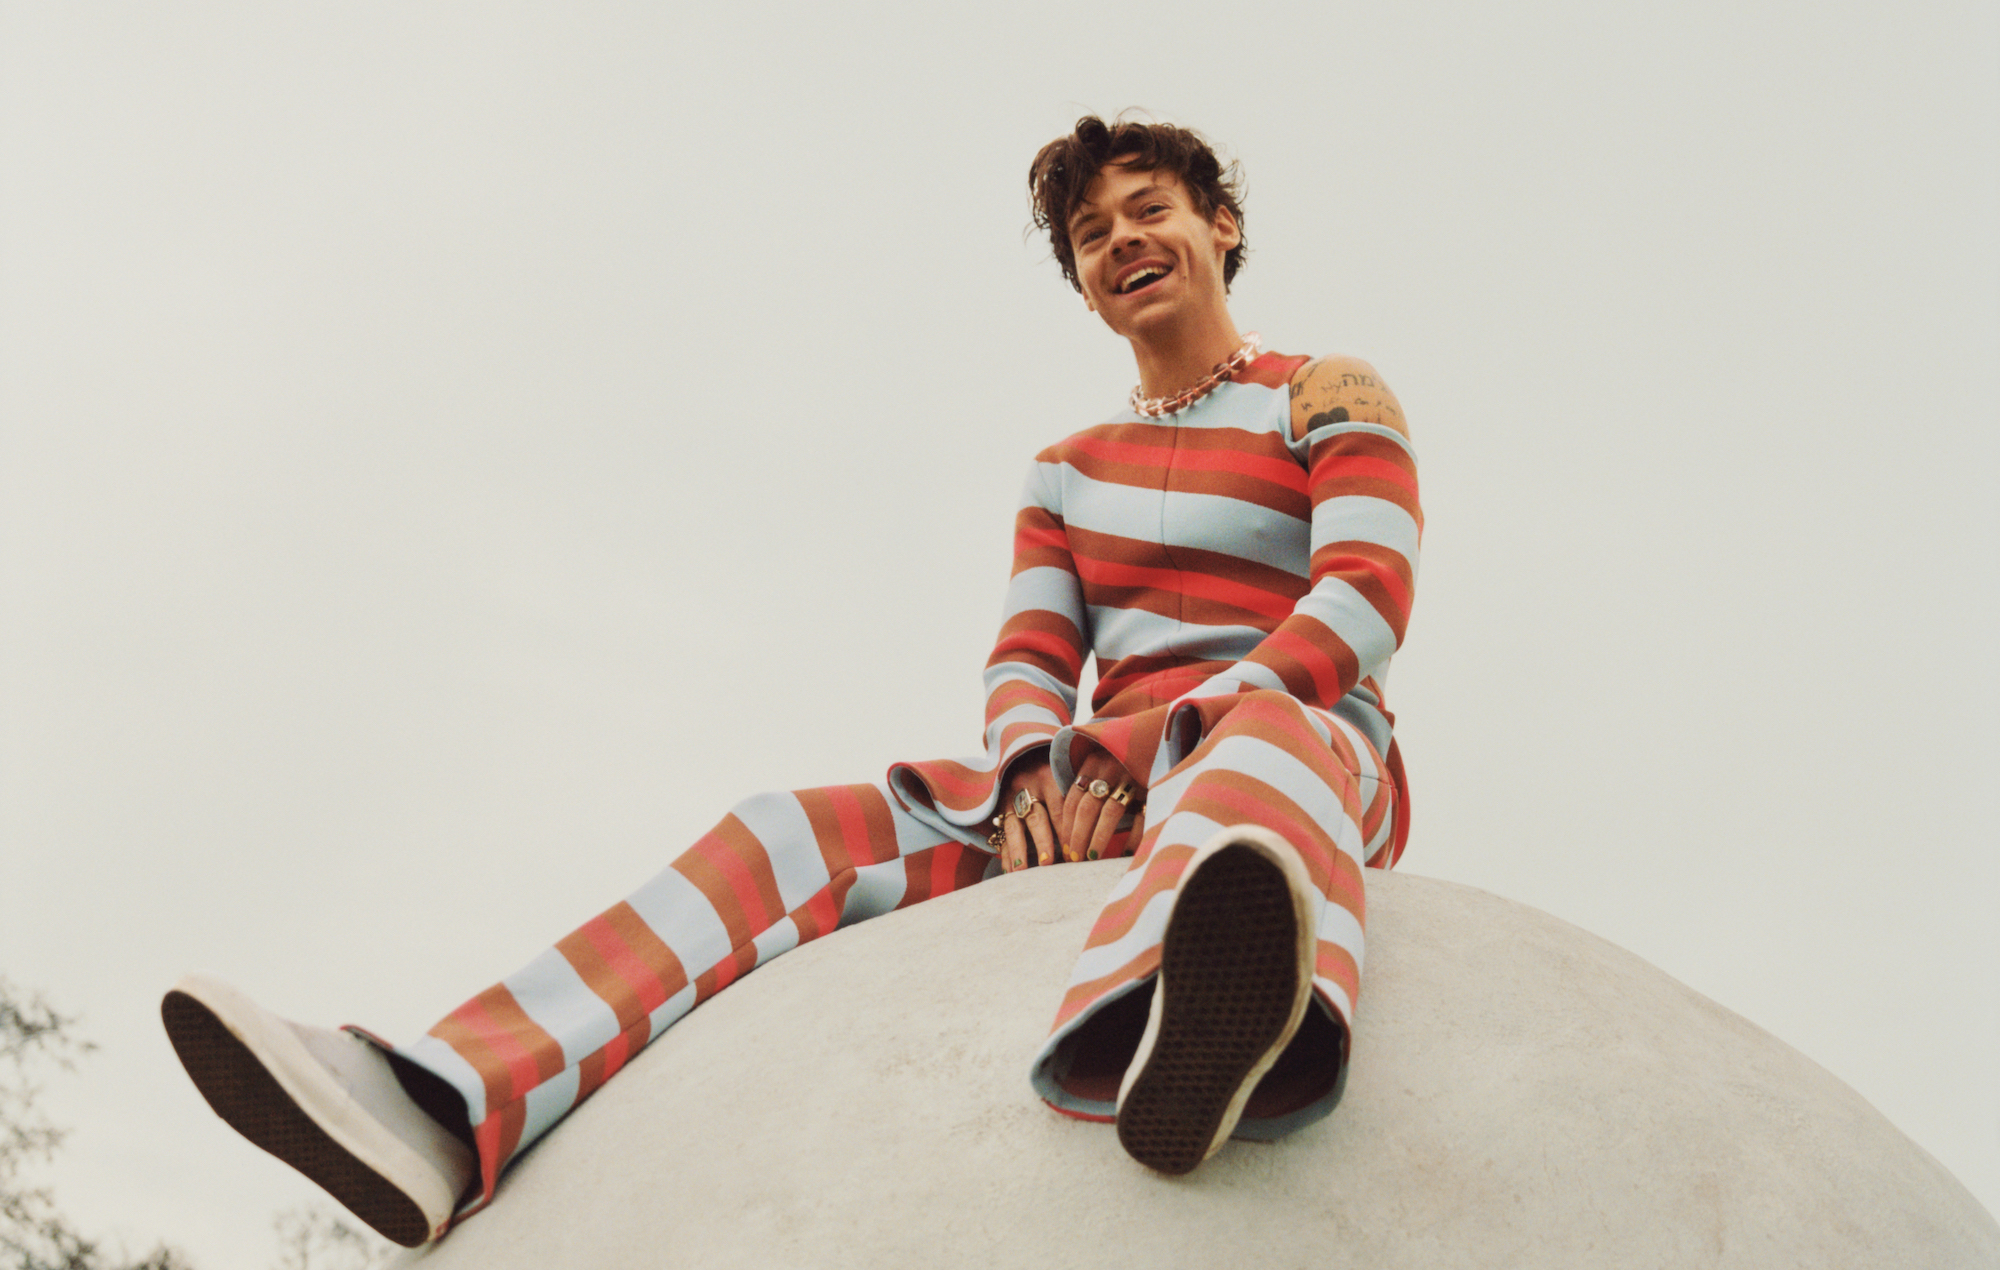 Harry Styles wearing red stripes